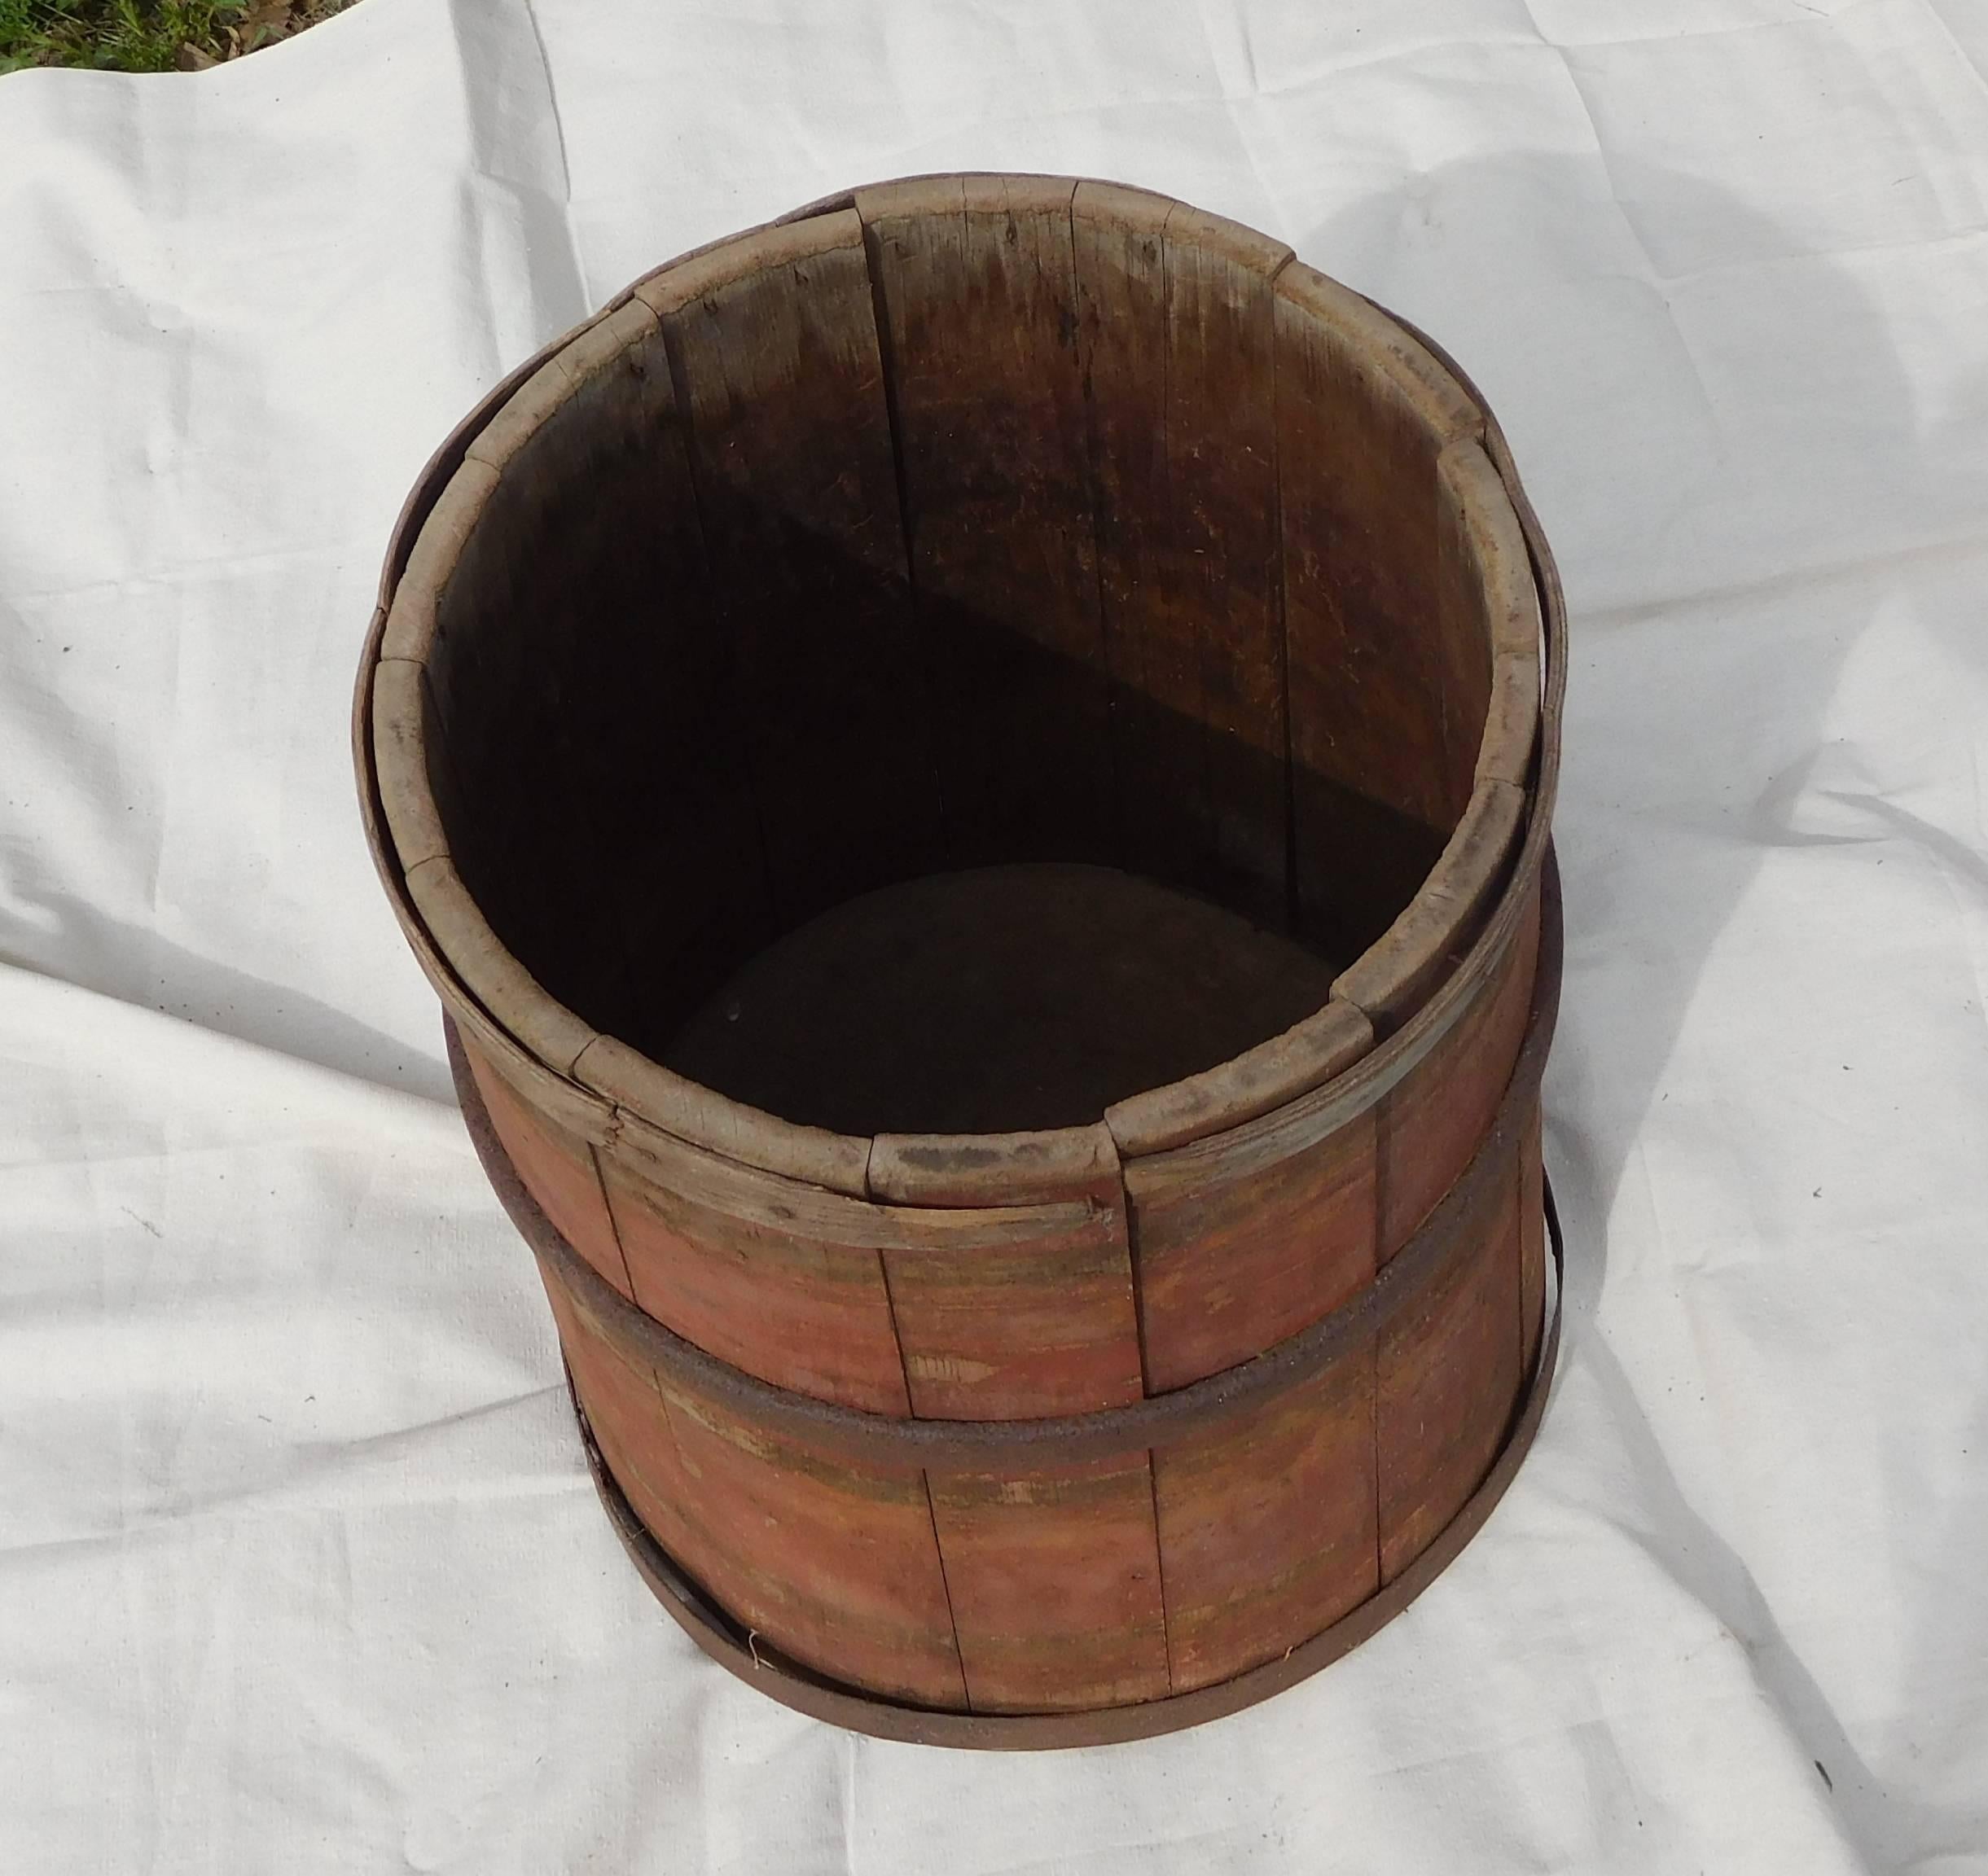 Large Master Maple Sap Collecting Barrel in Old Red Wash, Vermont, circa 1880 In Fair Condition For Sale In Quechee, VT